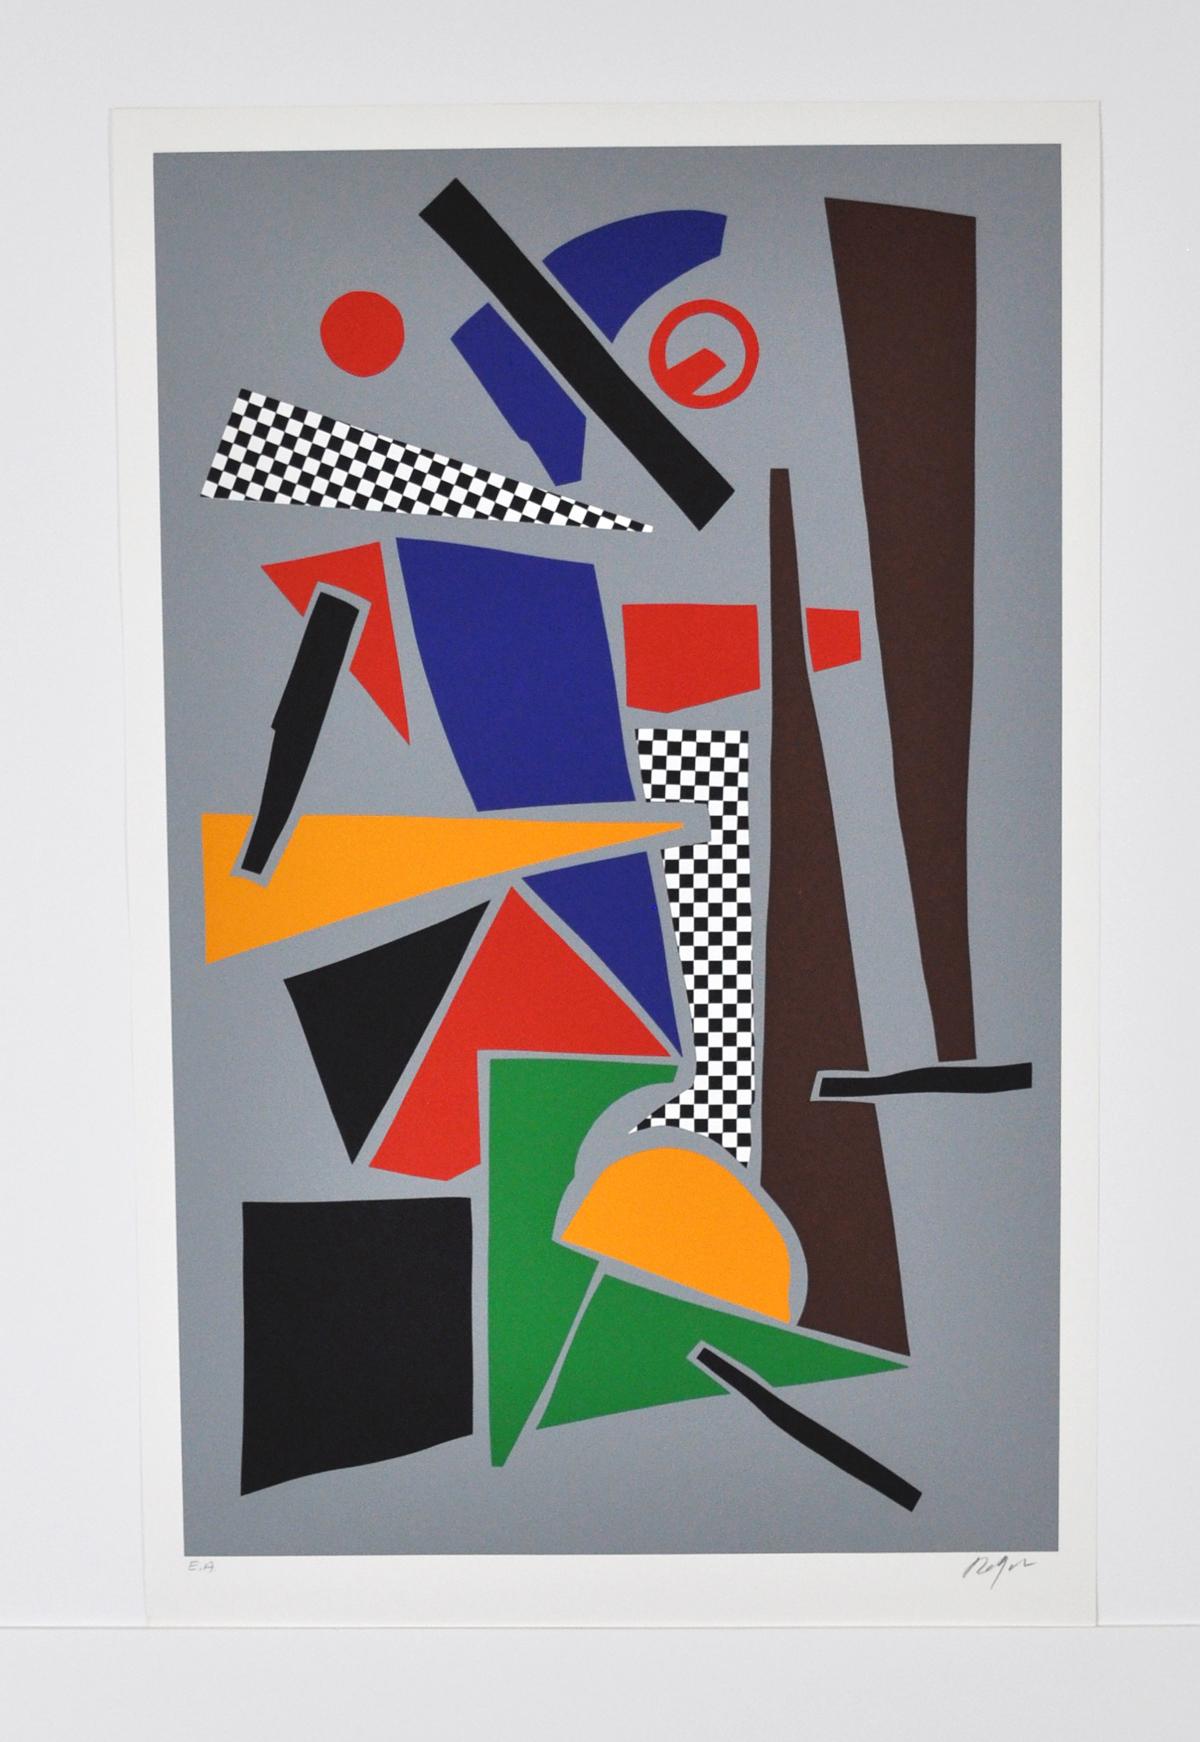 Screen Print by the Danish artist Robert Jacobsen
Untitled, late 1980s
EA (artist's proof), signed with the artist's monogram lower right. 
94 cm H x 60 cm W, unframed.

Robert Jacobsen was a Danish artist who was self-taught as a sculptor and